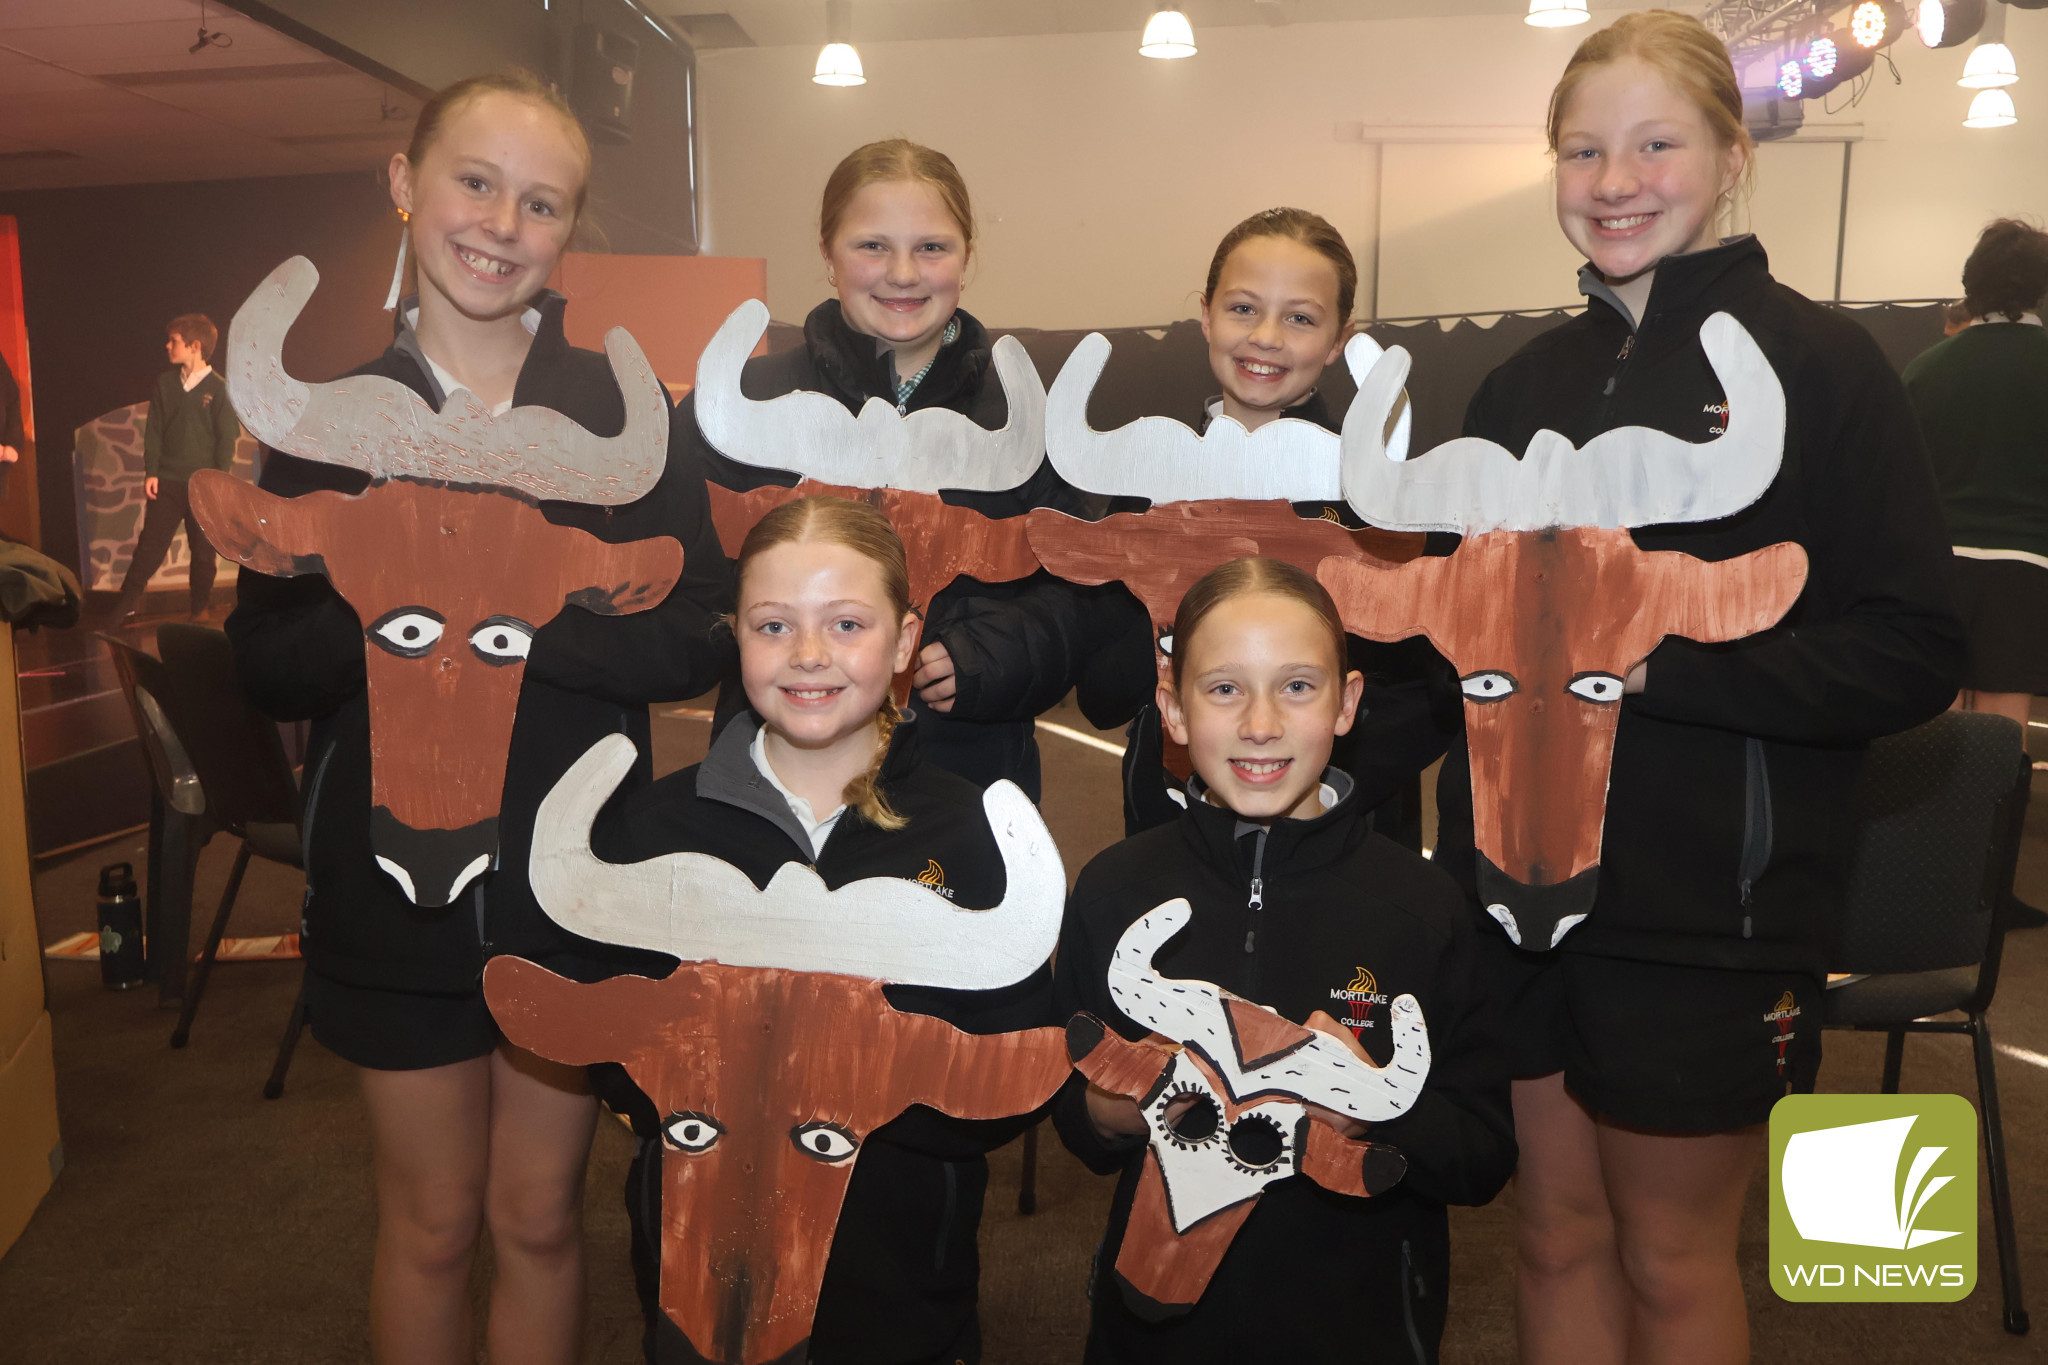 Team work: Mortlake College students have been hard at work on this year’s school production, which includes all aspects from performing through to choreography and creating the associated stage art.